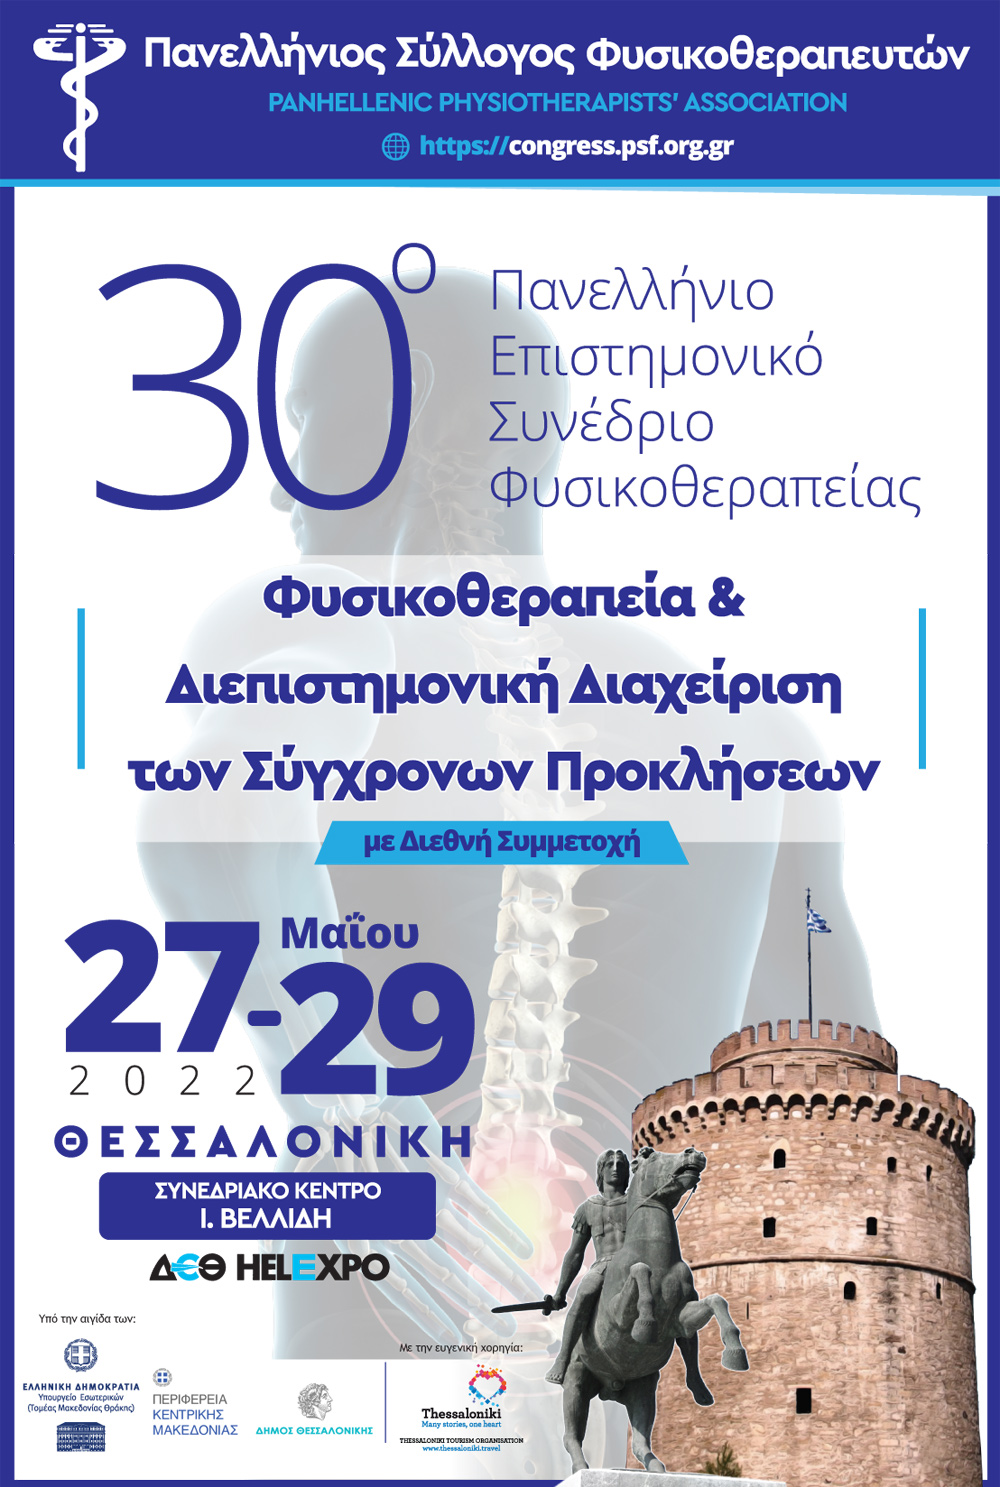 Poster of physiotherapy conference in thessaloniki